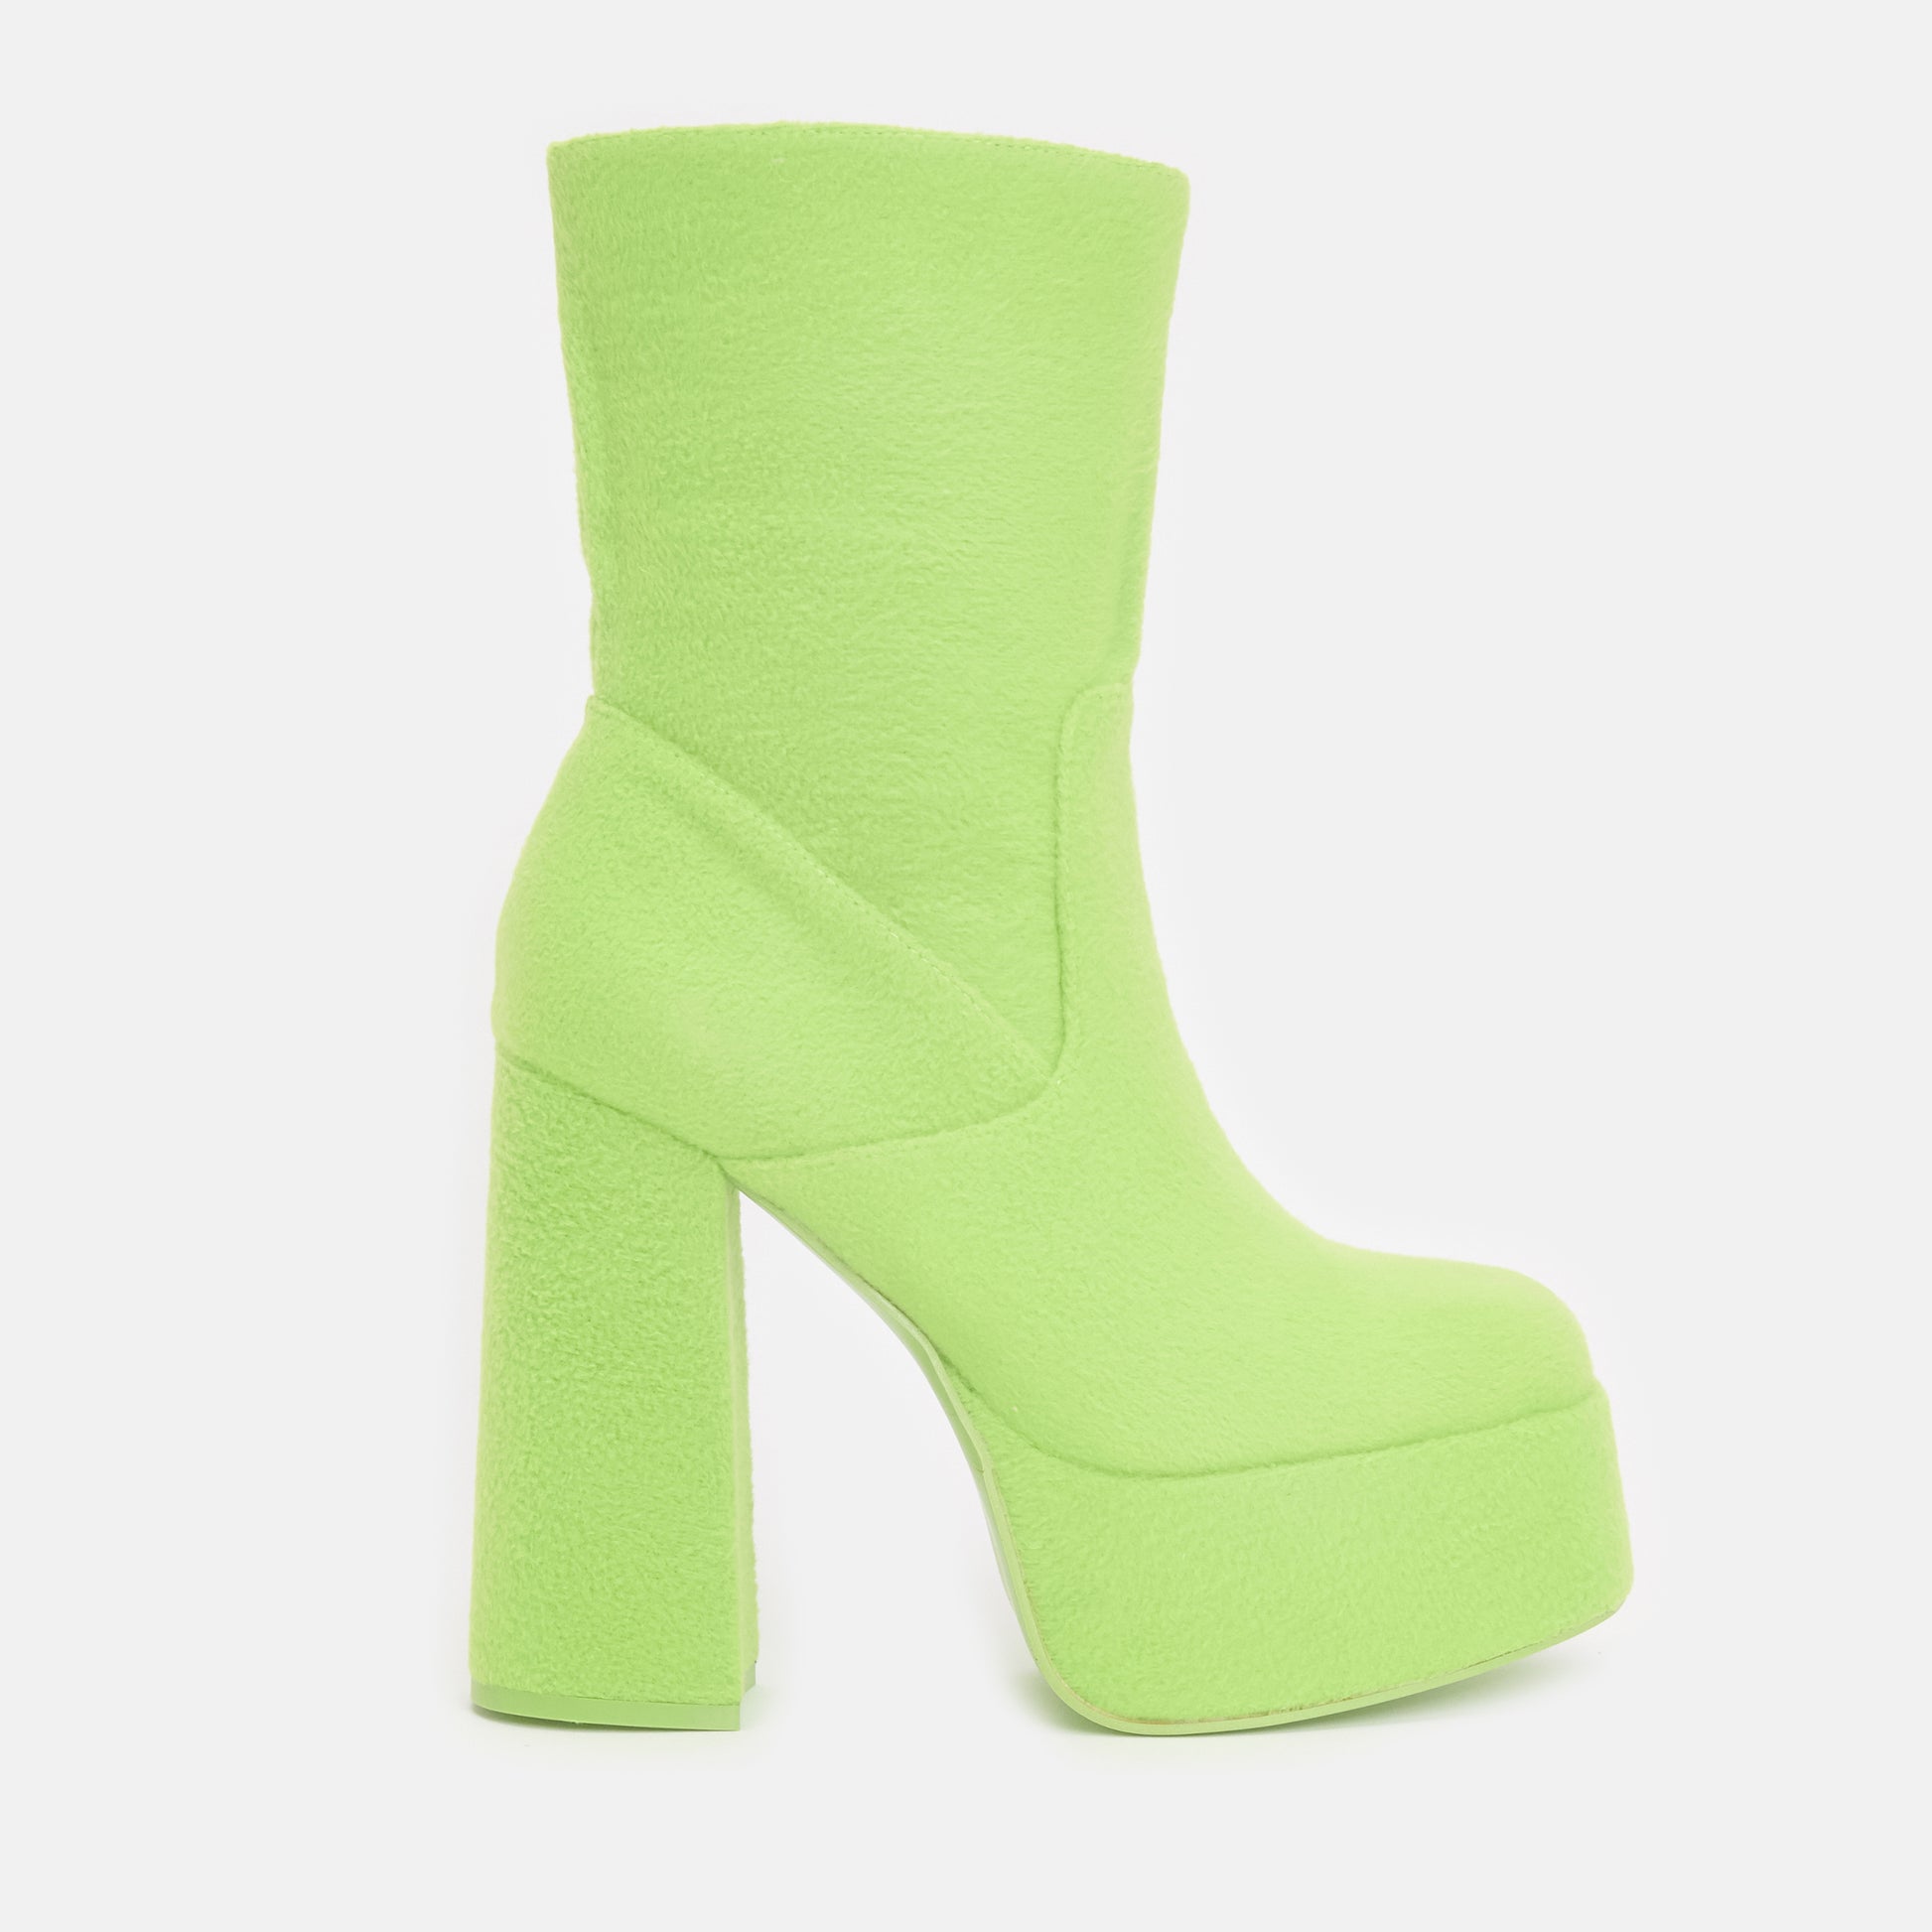 Dipsy Fluffy Platform Boots - Ankle Boots - KOI Footwear - Green - Side View